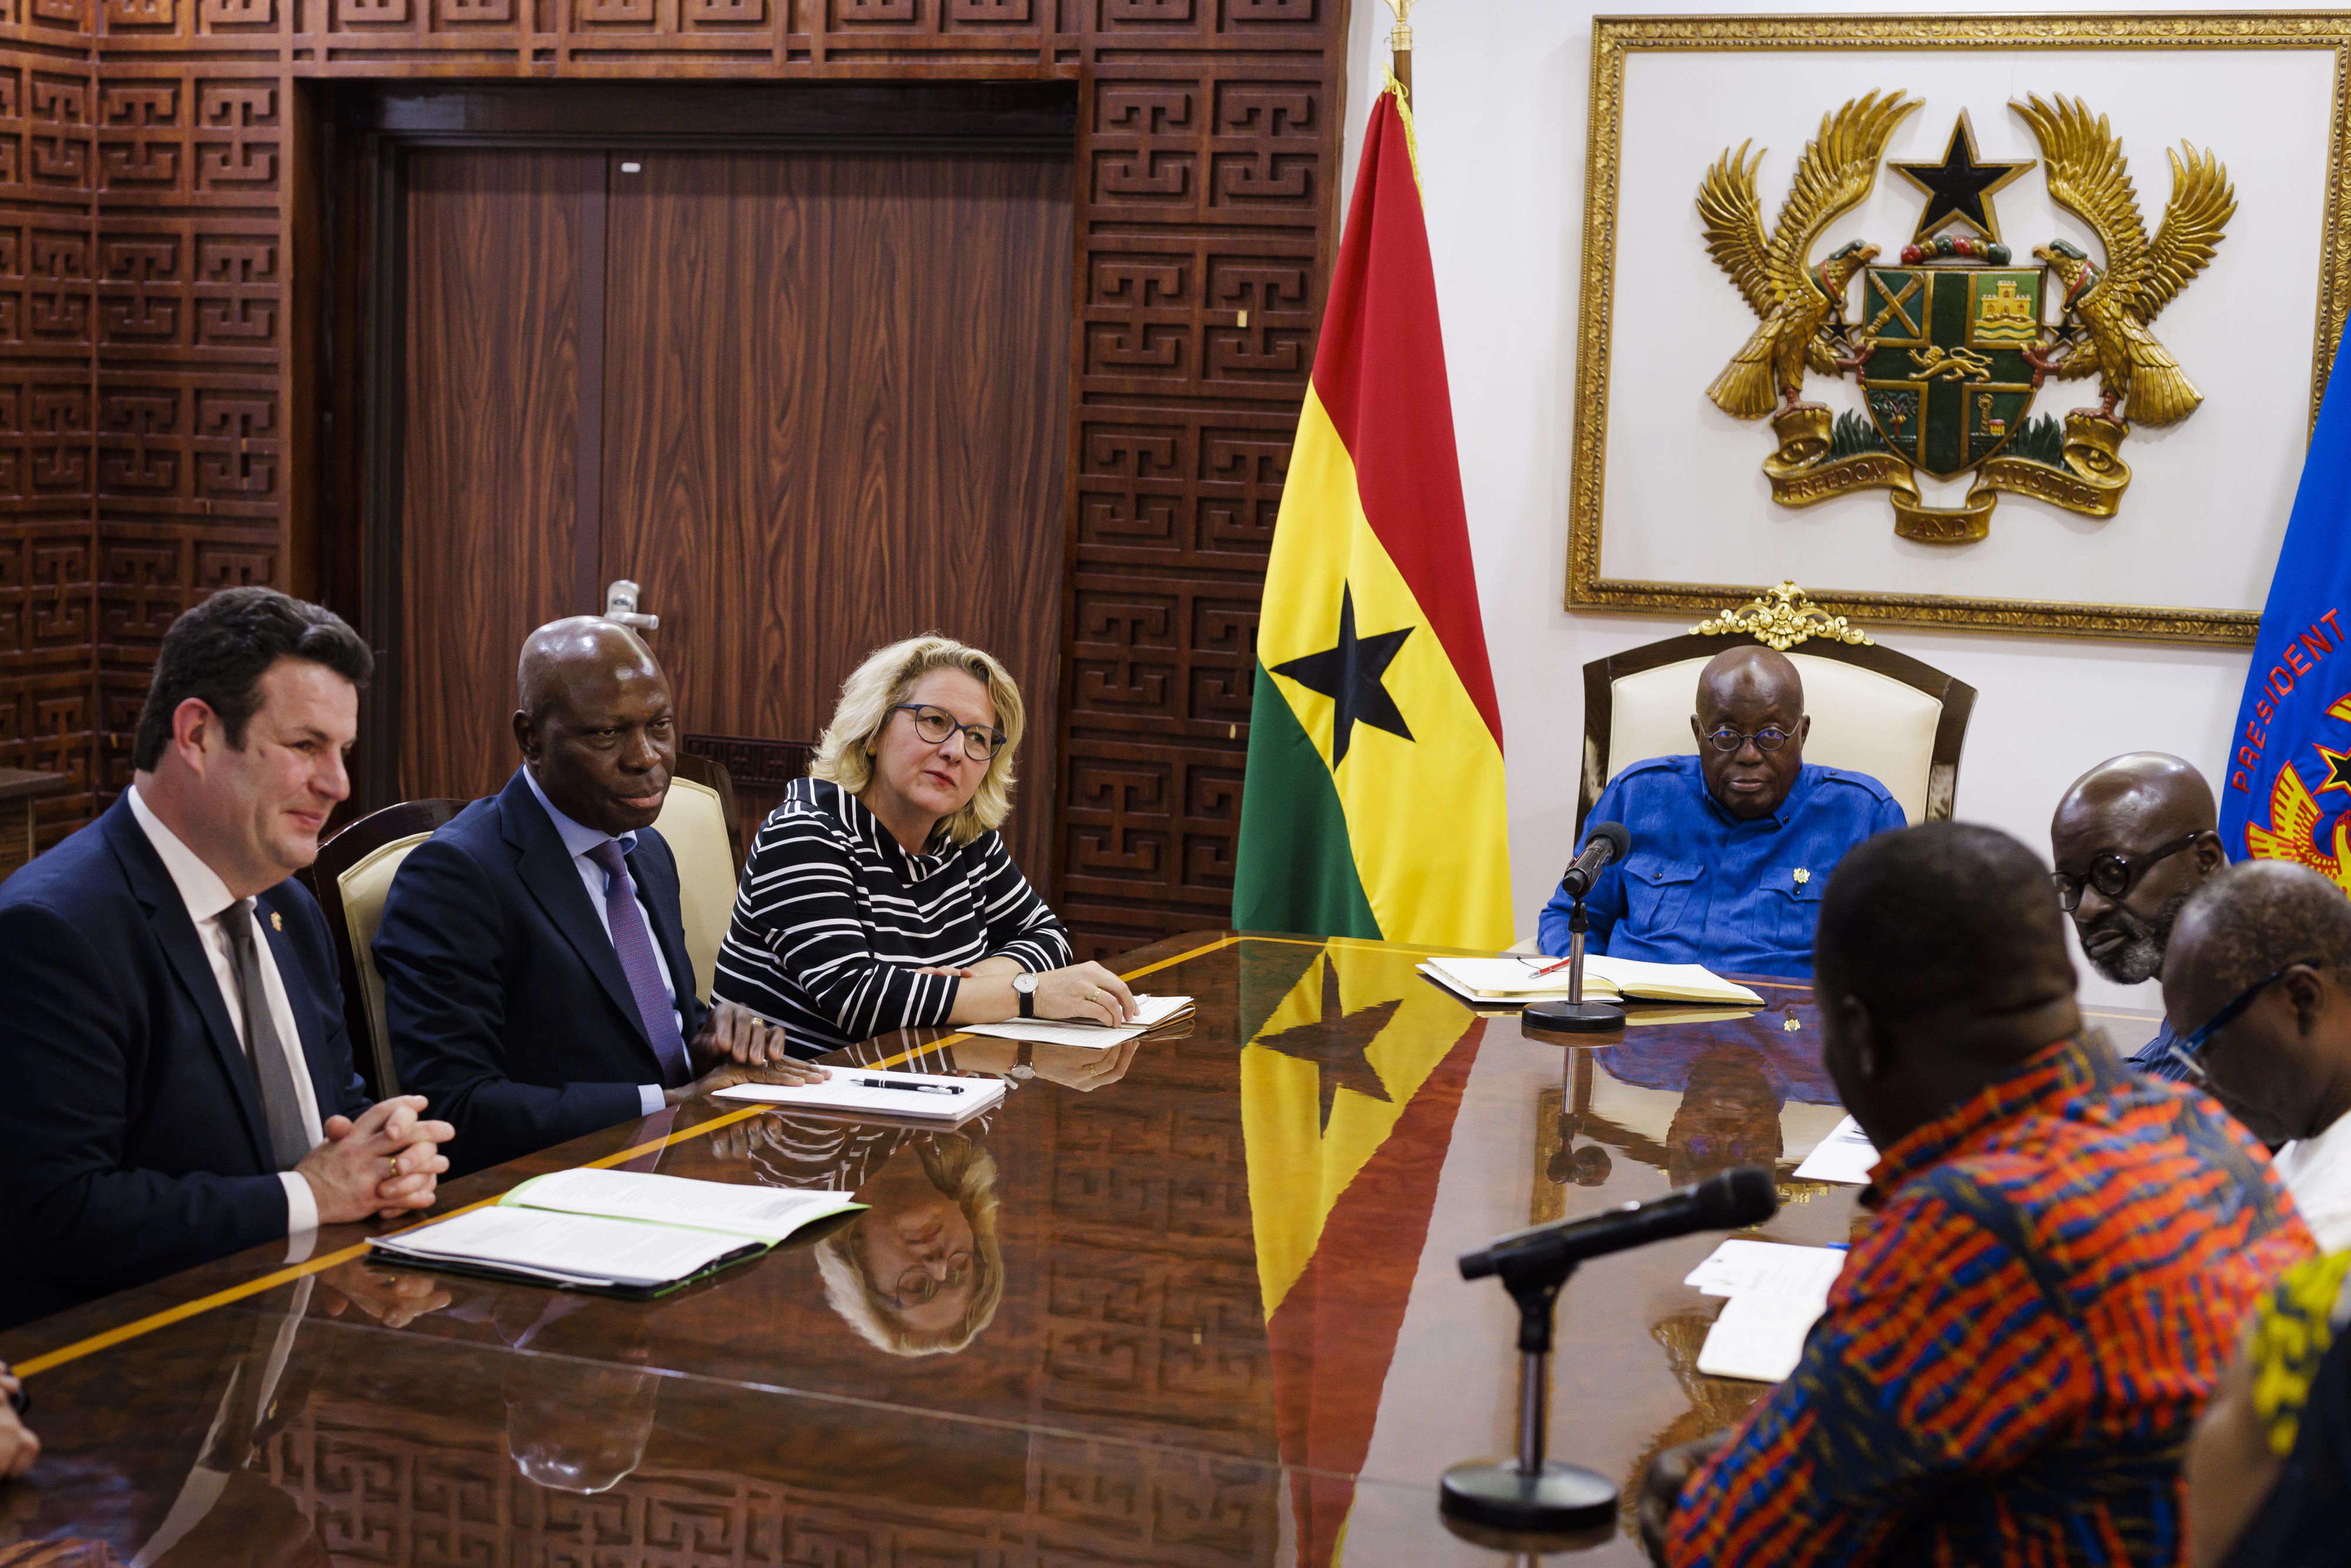 Federal Labour Minister Hubertus Heil, the Director-General of the International Labour Organization (ILO), Gilbert Houngbo, and Federal Development Minister Svenja Schulze during the meeting with the Ghanaian President Nana Akufo-Addo in Accra, Ghana (from left)